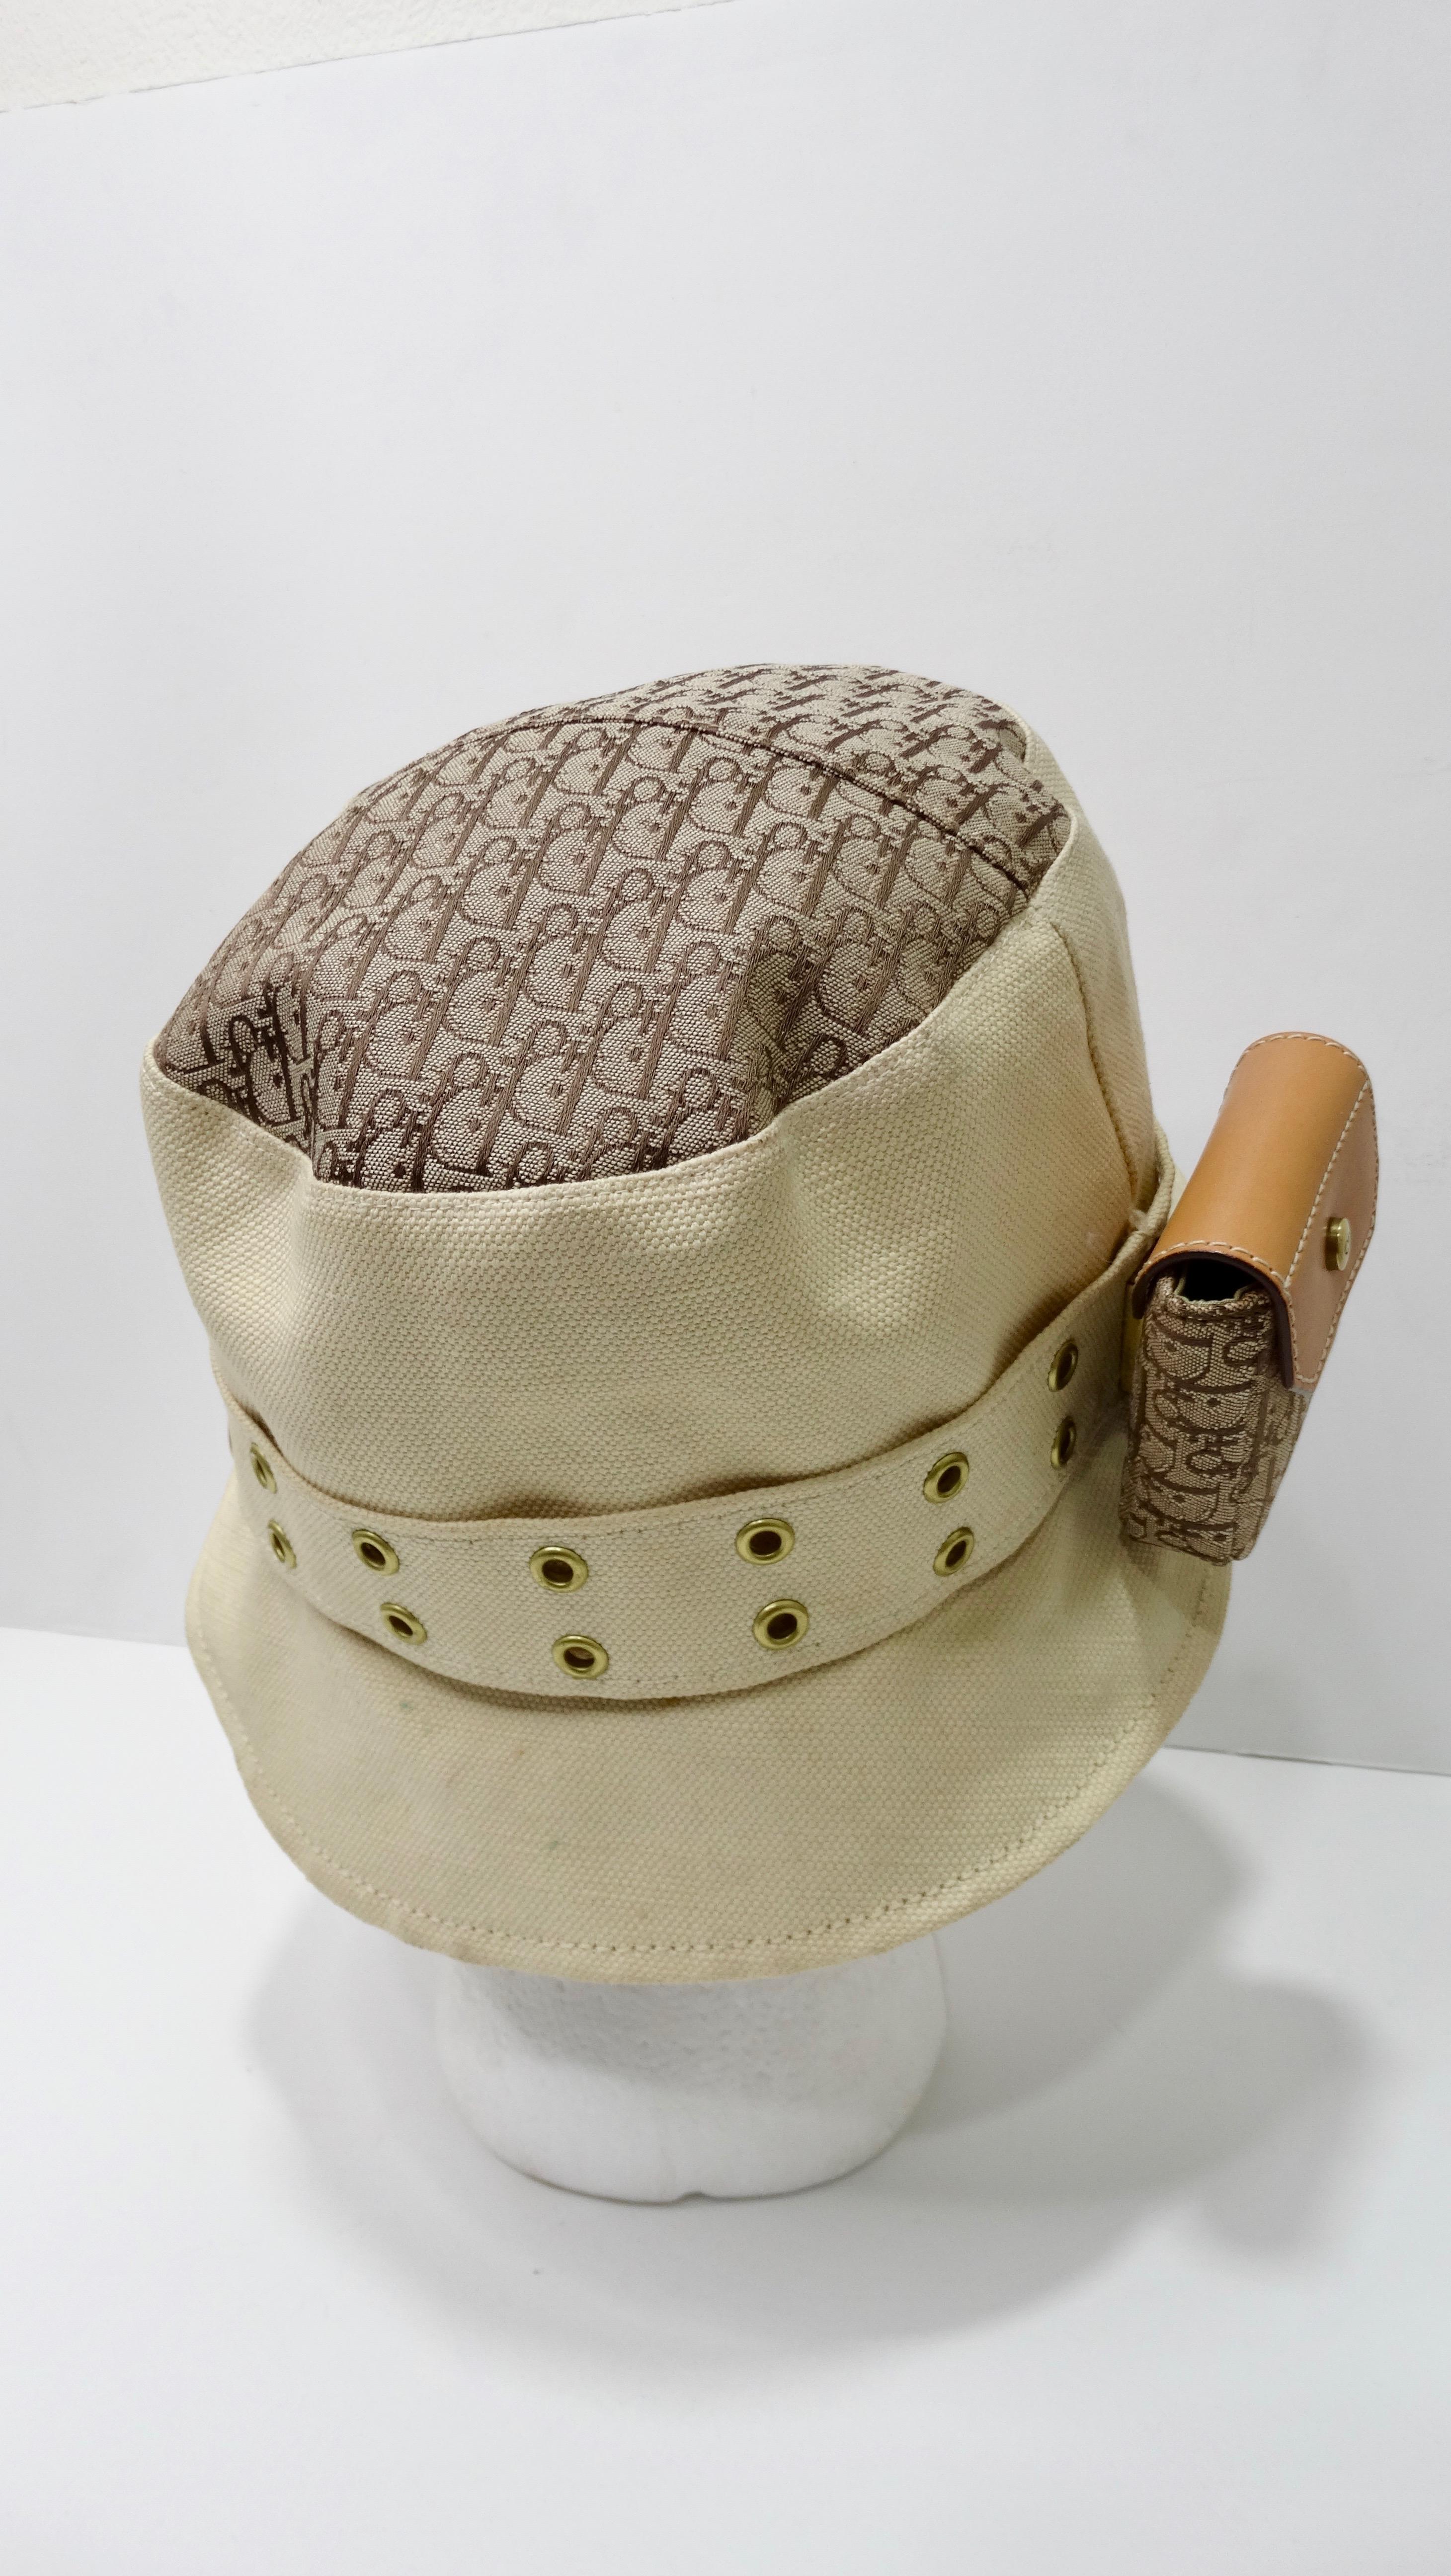 Complete your dream street wear look with this amazing Galliano for Dior bucket hat! Circa 2002 from their Spring collection, this two-tone canvas bucket hat features the classic Dior monogram, a grommet studded band adorned with a leather and